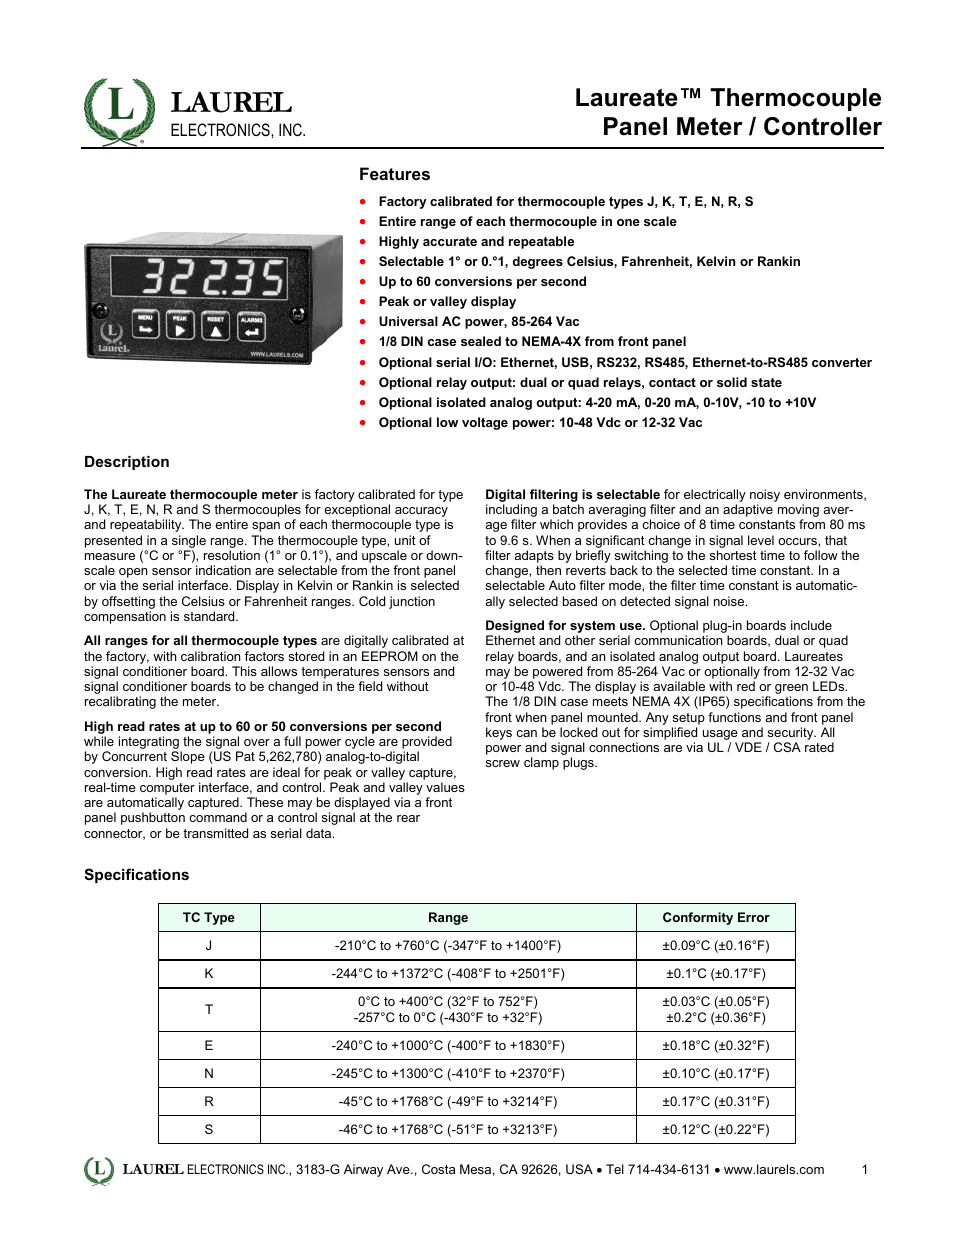 Laureate Thermocouple Panel Meter-Controller